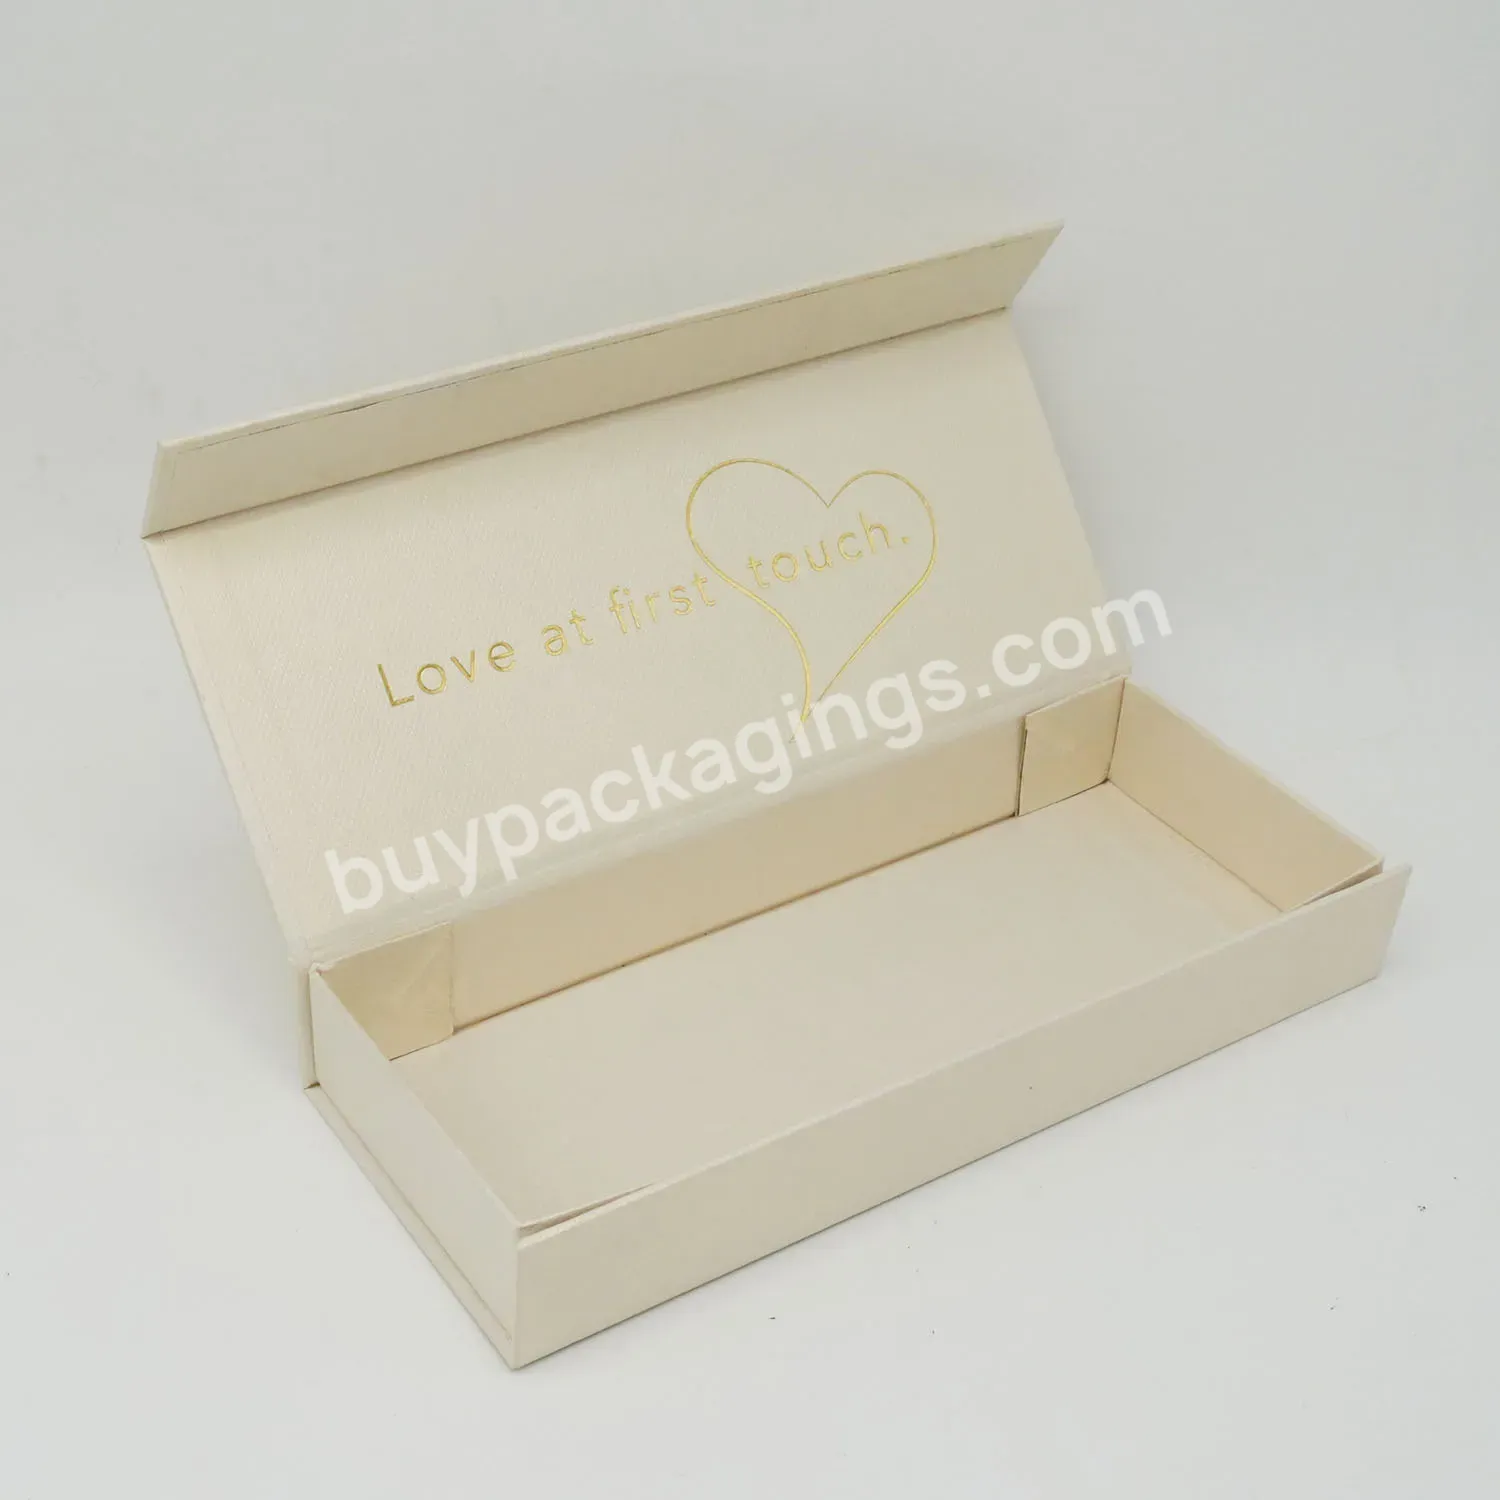 Skin Care Cosmetics Makeup Gift Box Packaging Luxury Gold Foil Logo White Foldable Storage Magnetic Closure Box With Lid